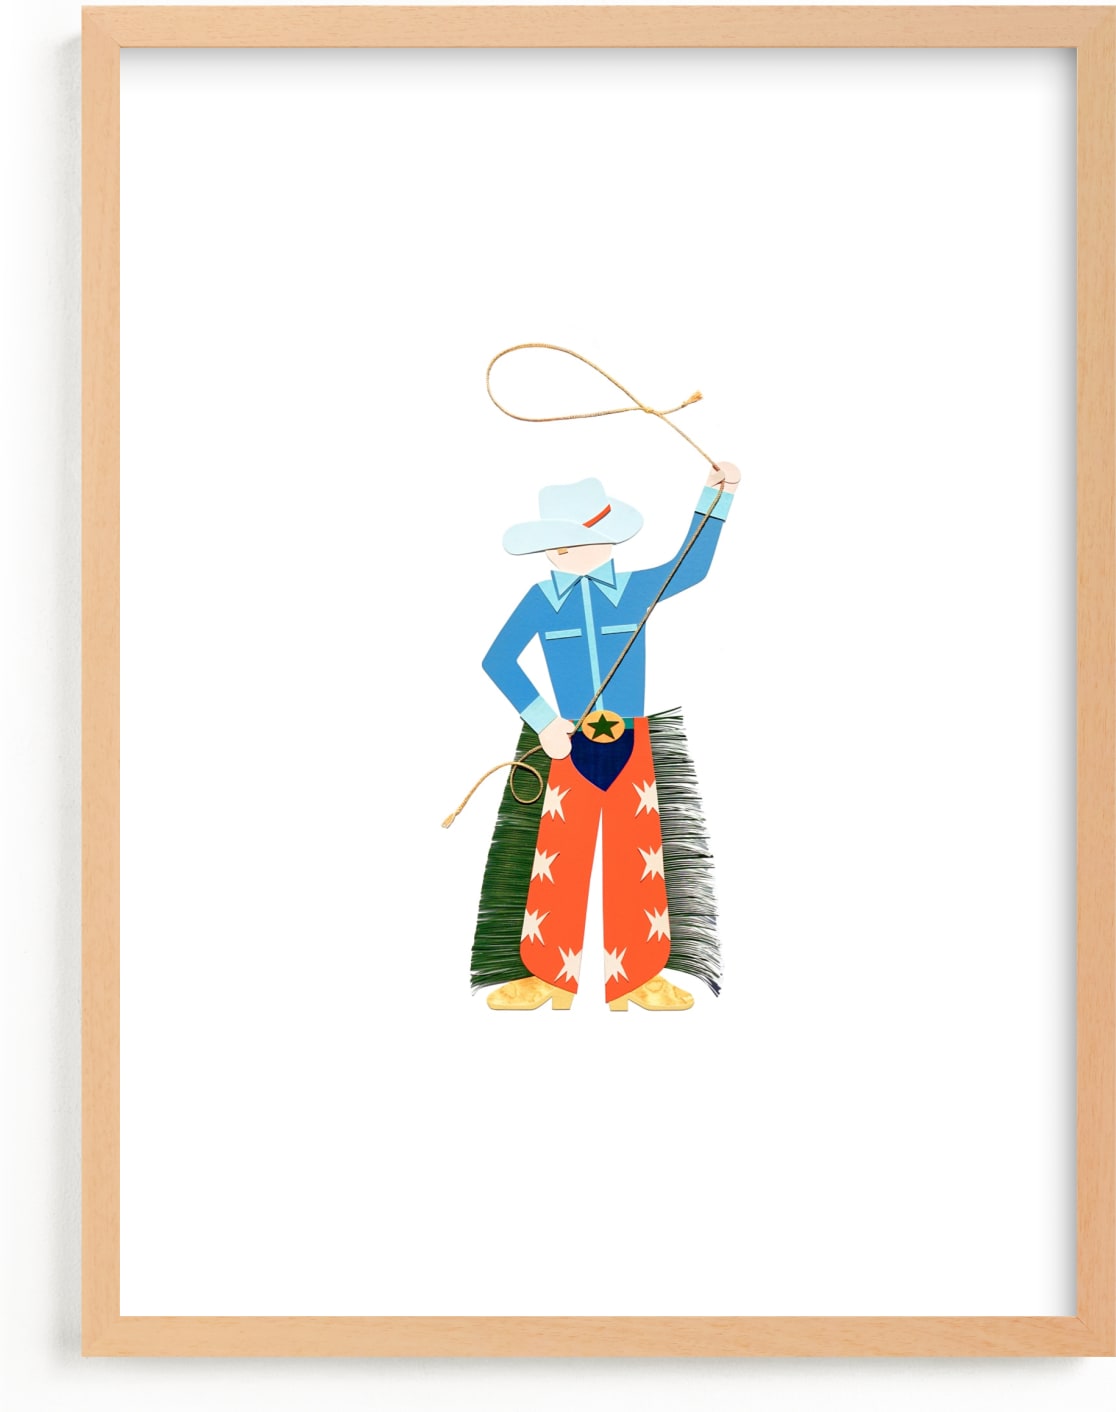 This is a blue, orange, green kids wall art by Kelsey Livingston called Cowboy Carl.